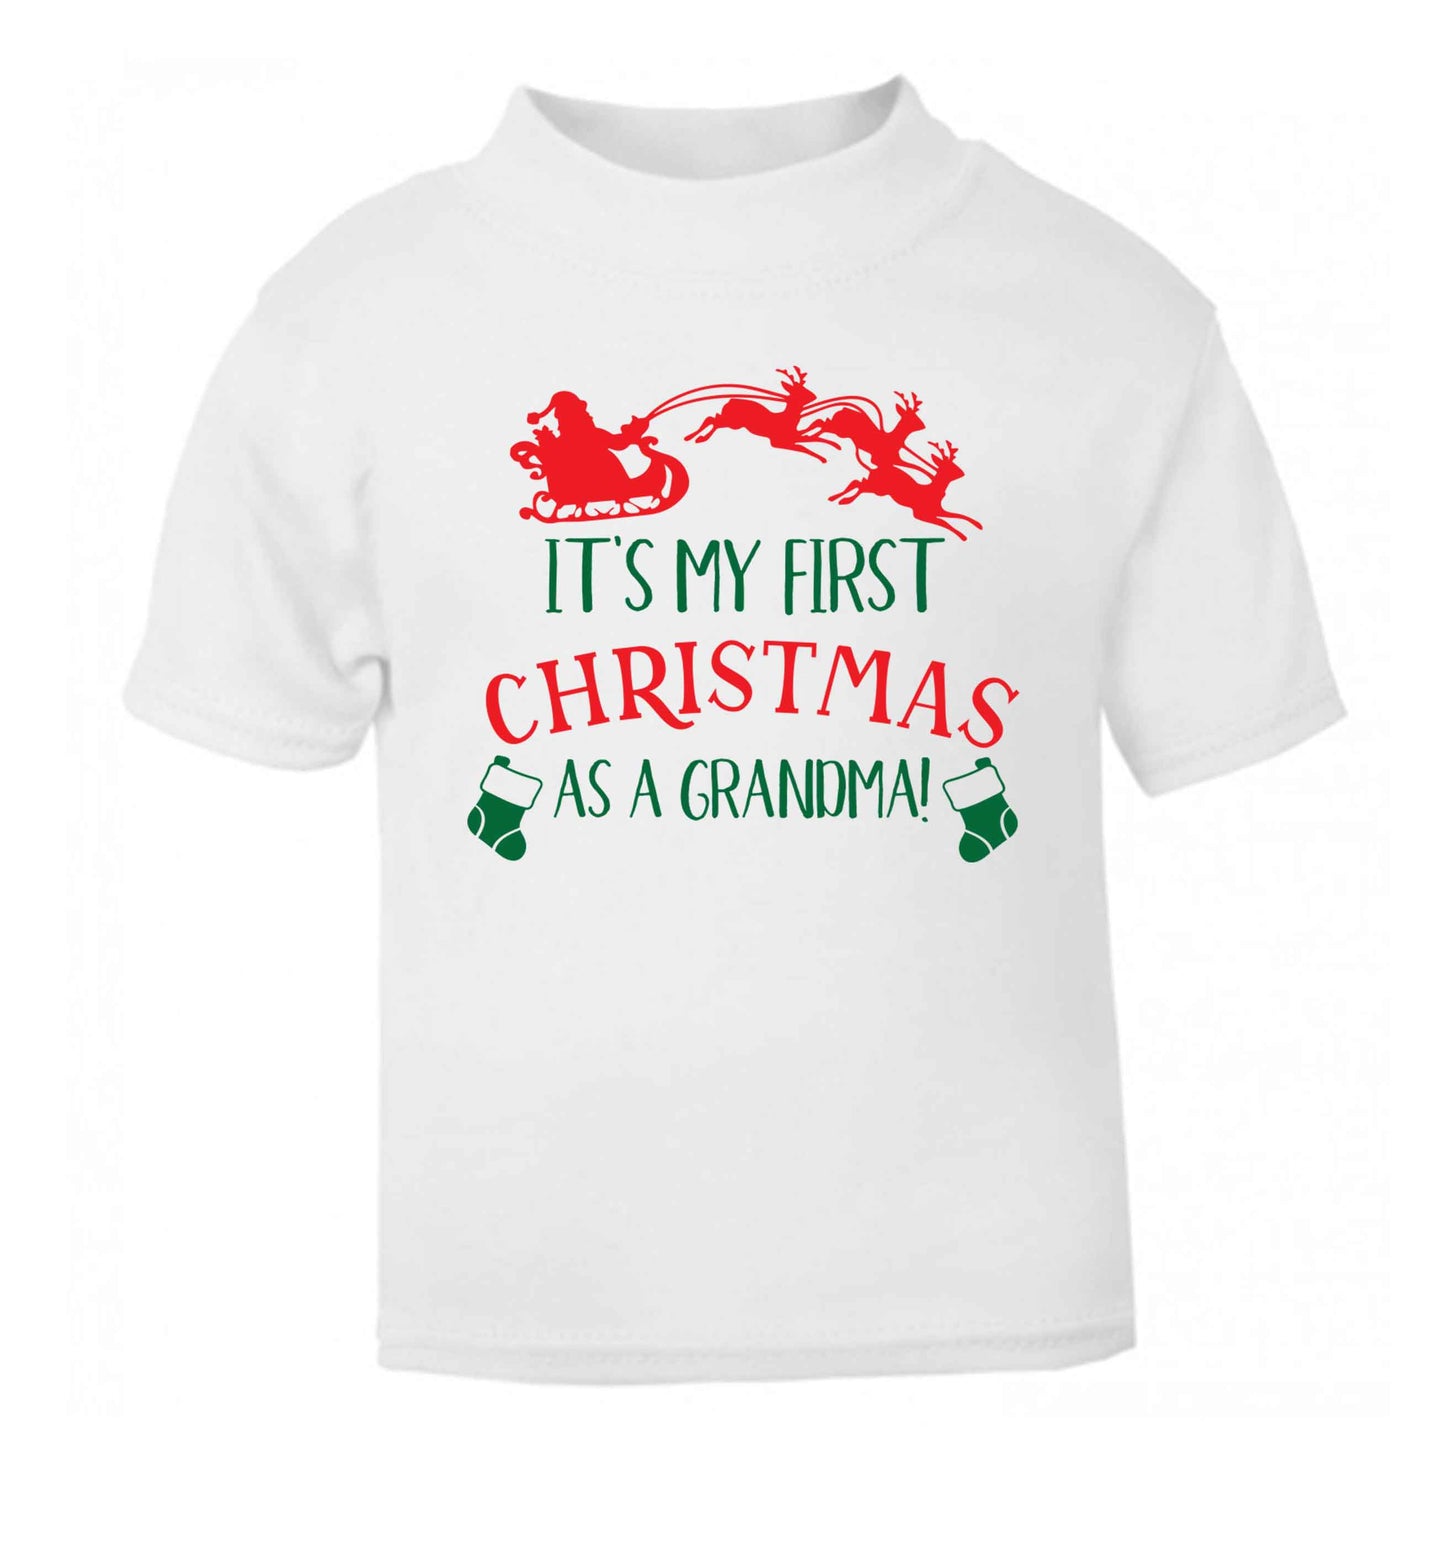 It's my first Christmas as a grandma! white Baby Toddler Tshirt 2 Years